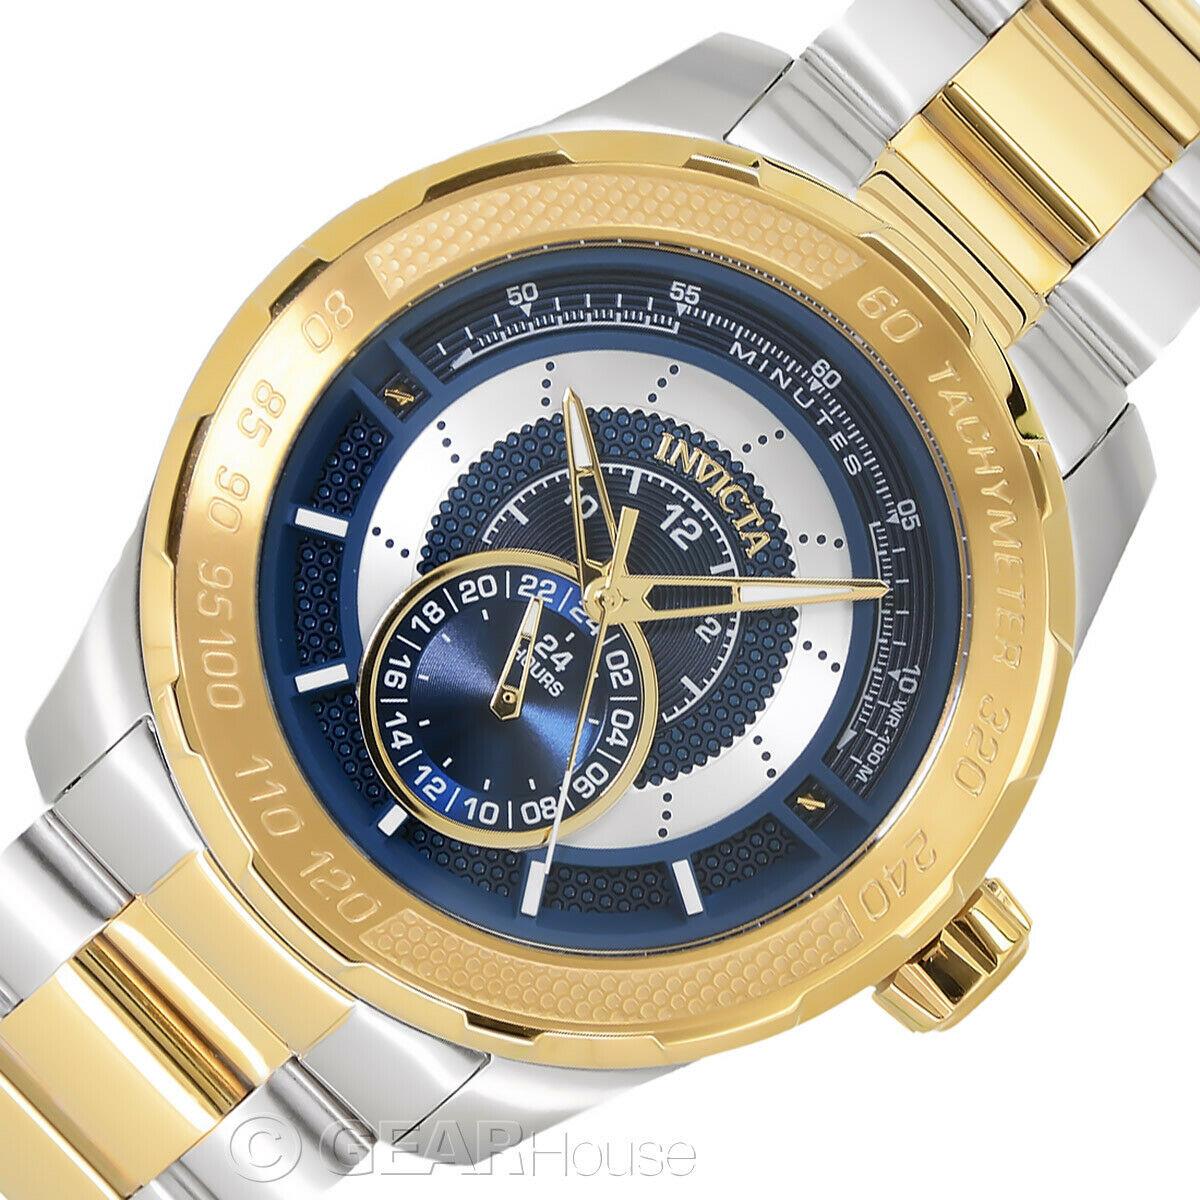 Invicta watch Rally - Blue Dial, Gold Band, Gold Bezel